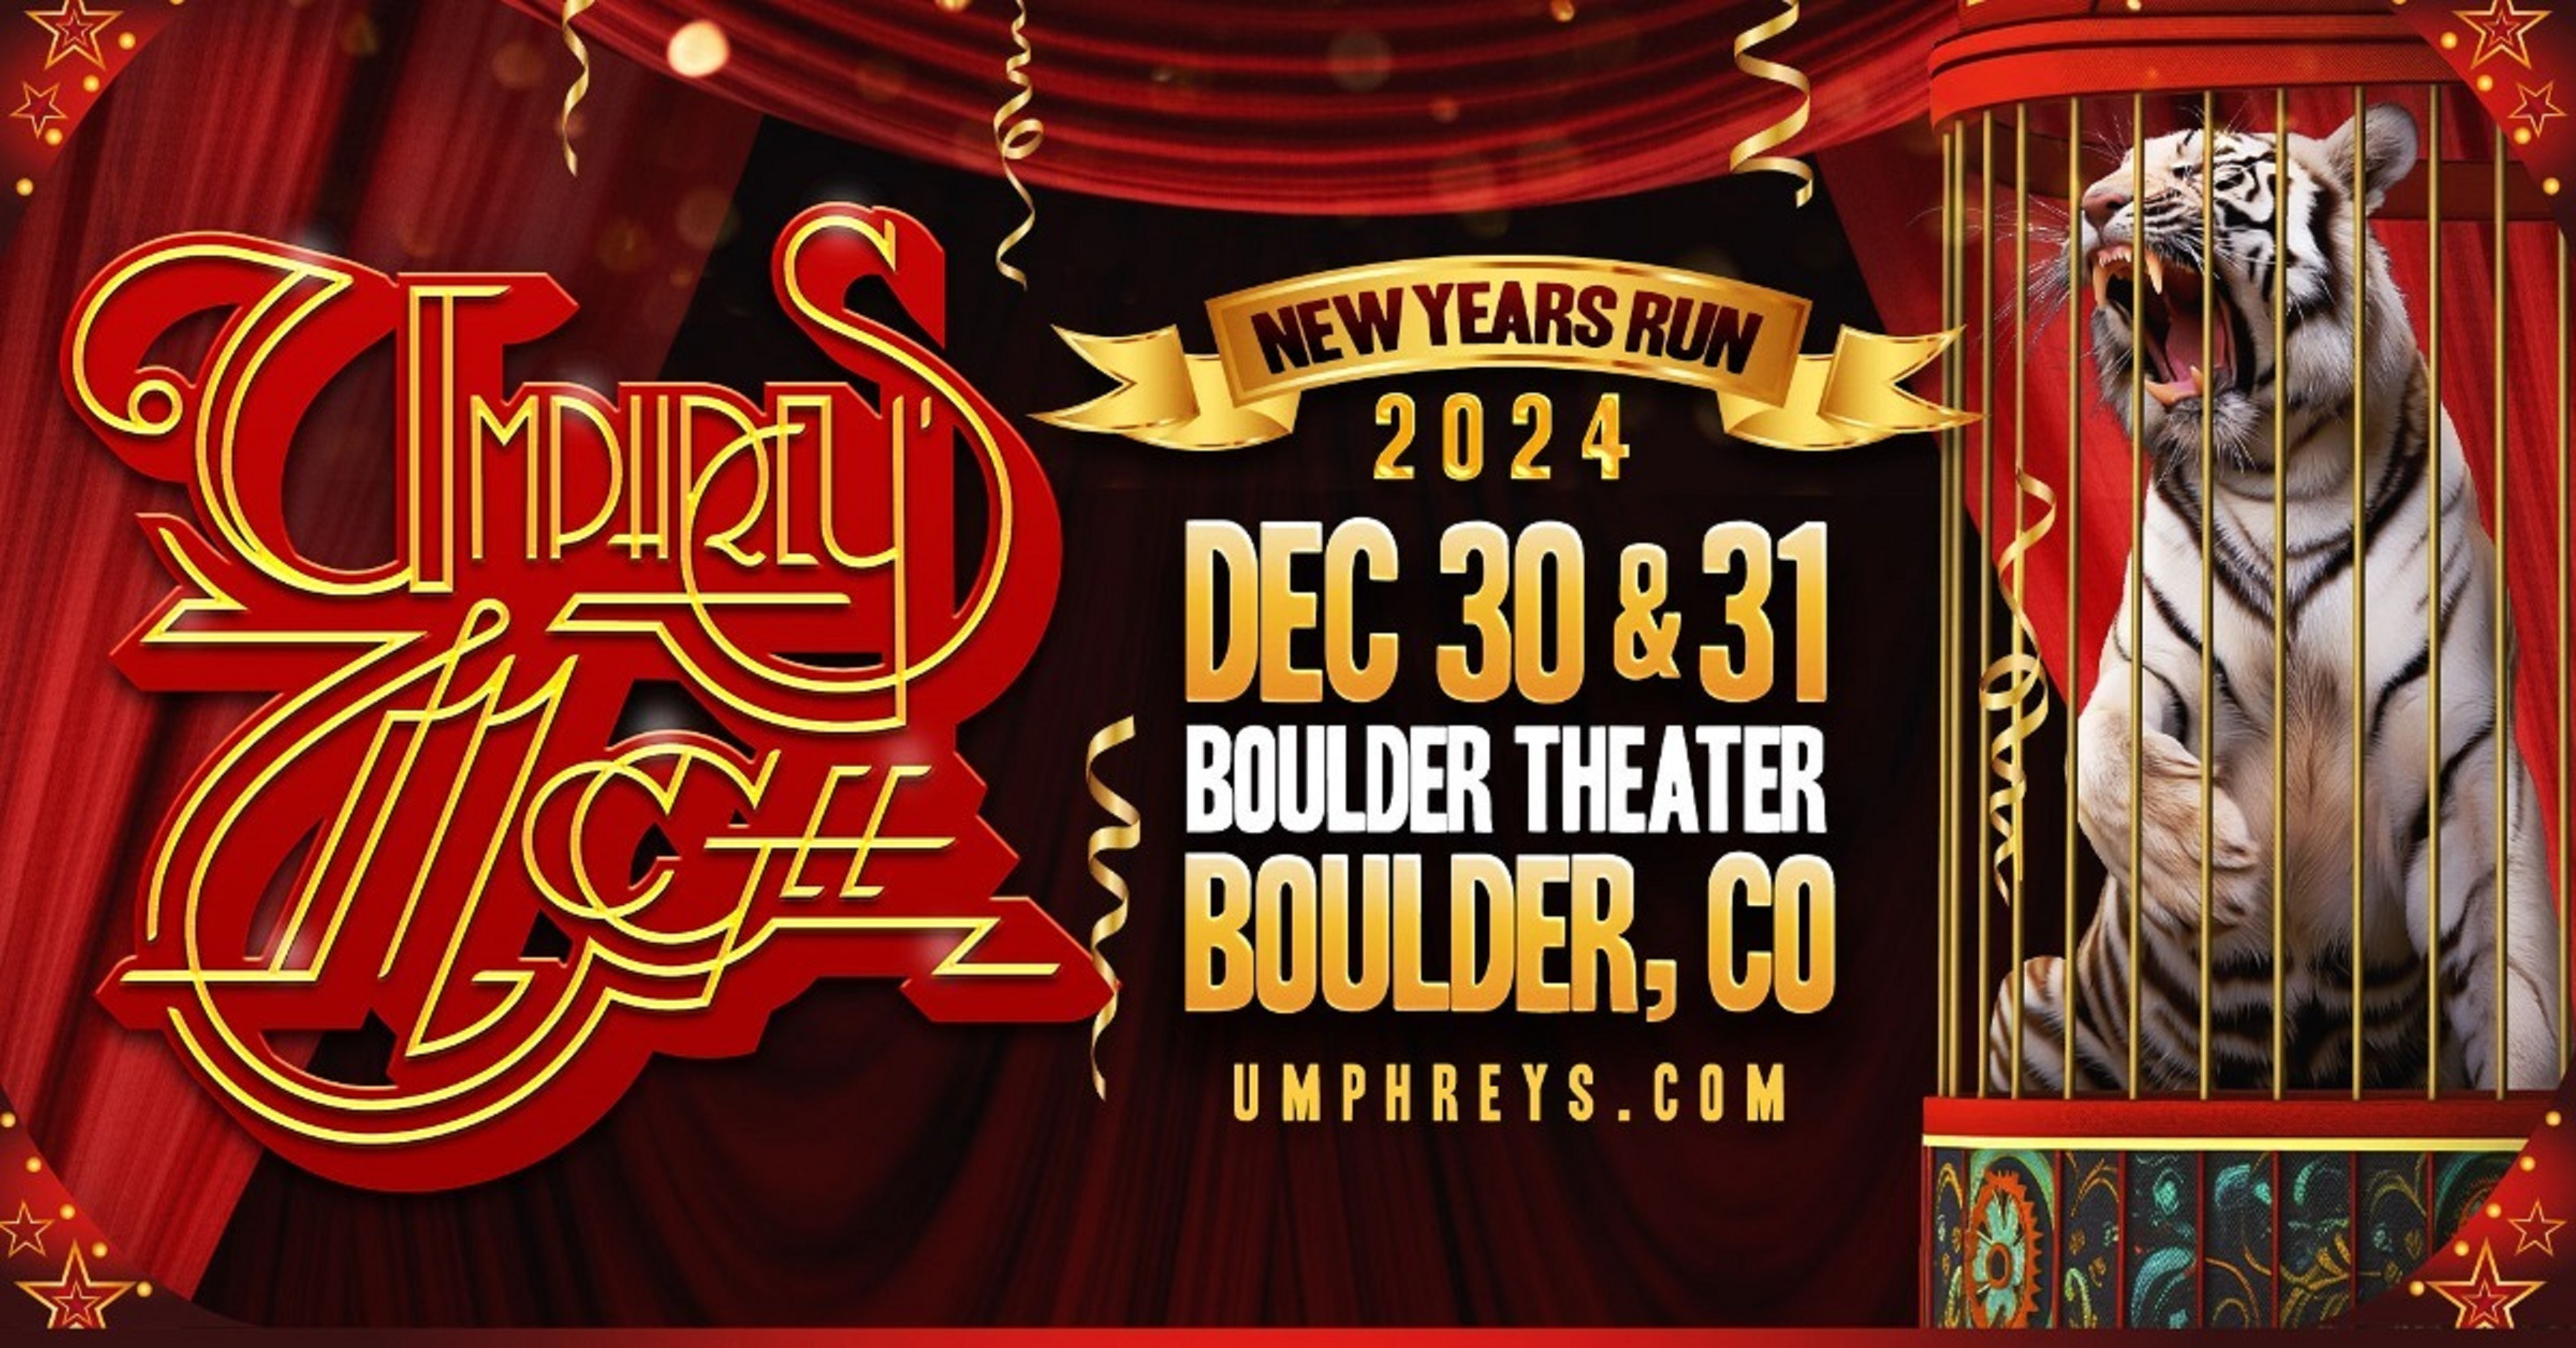 UMPHREY'S MCGEE ANNOUNCES NEW YEARS RUN AT BOULDER THEATER